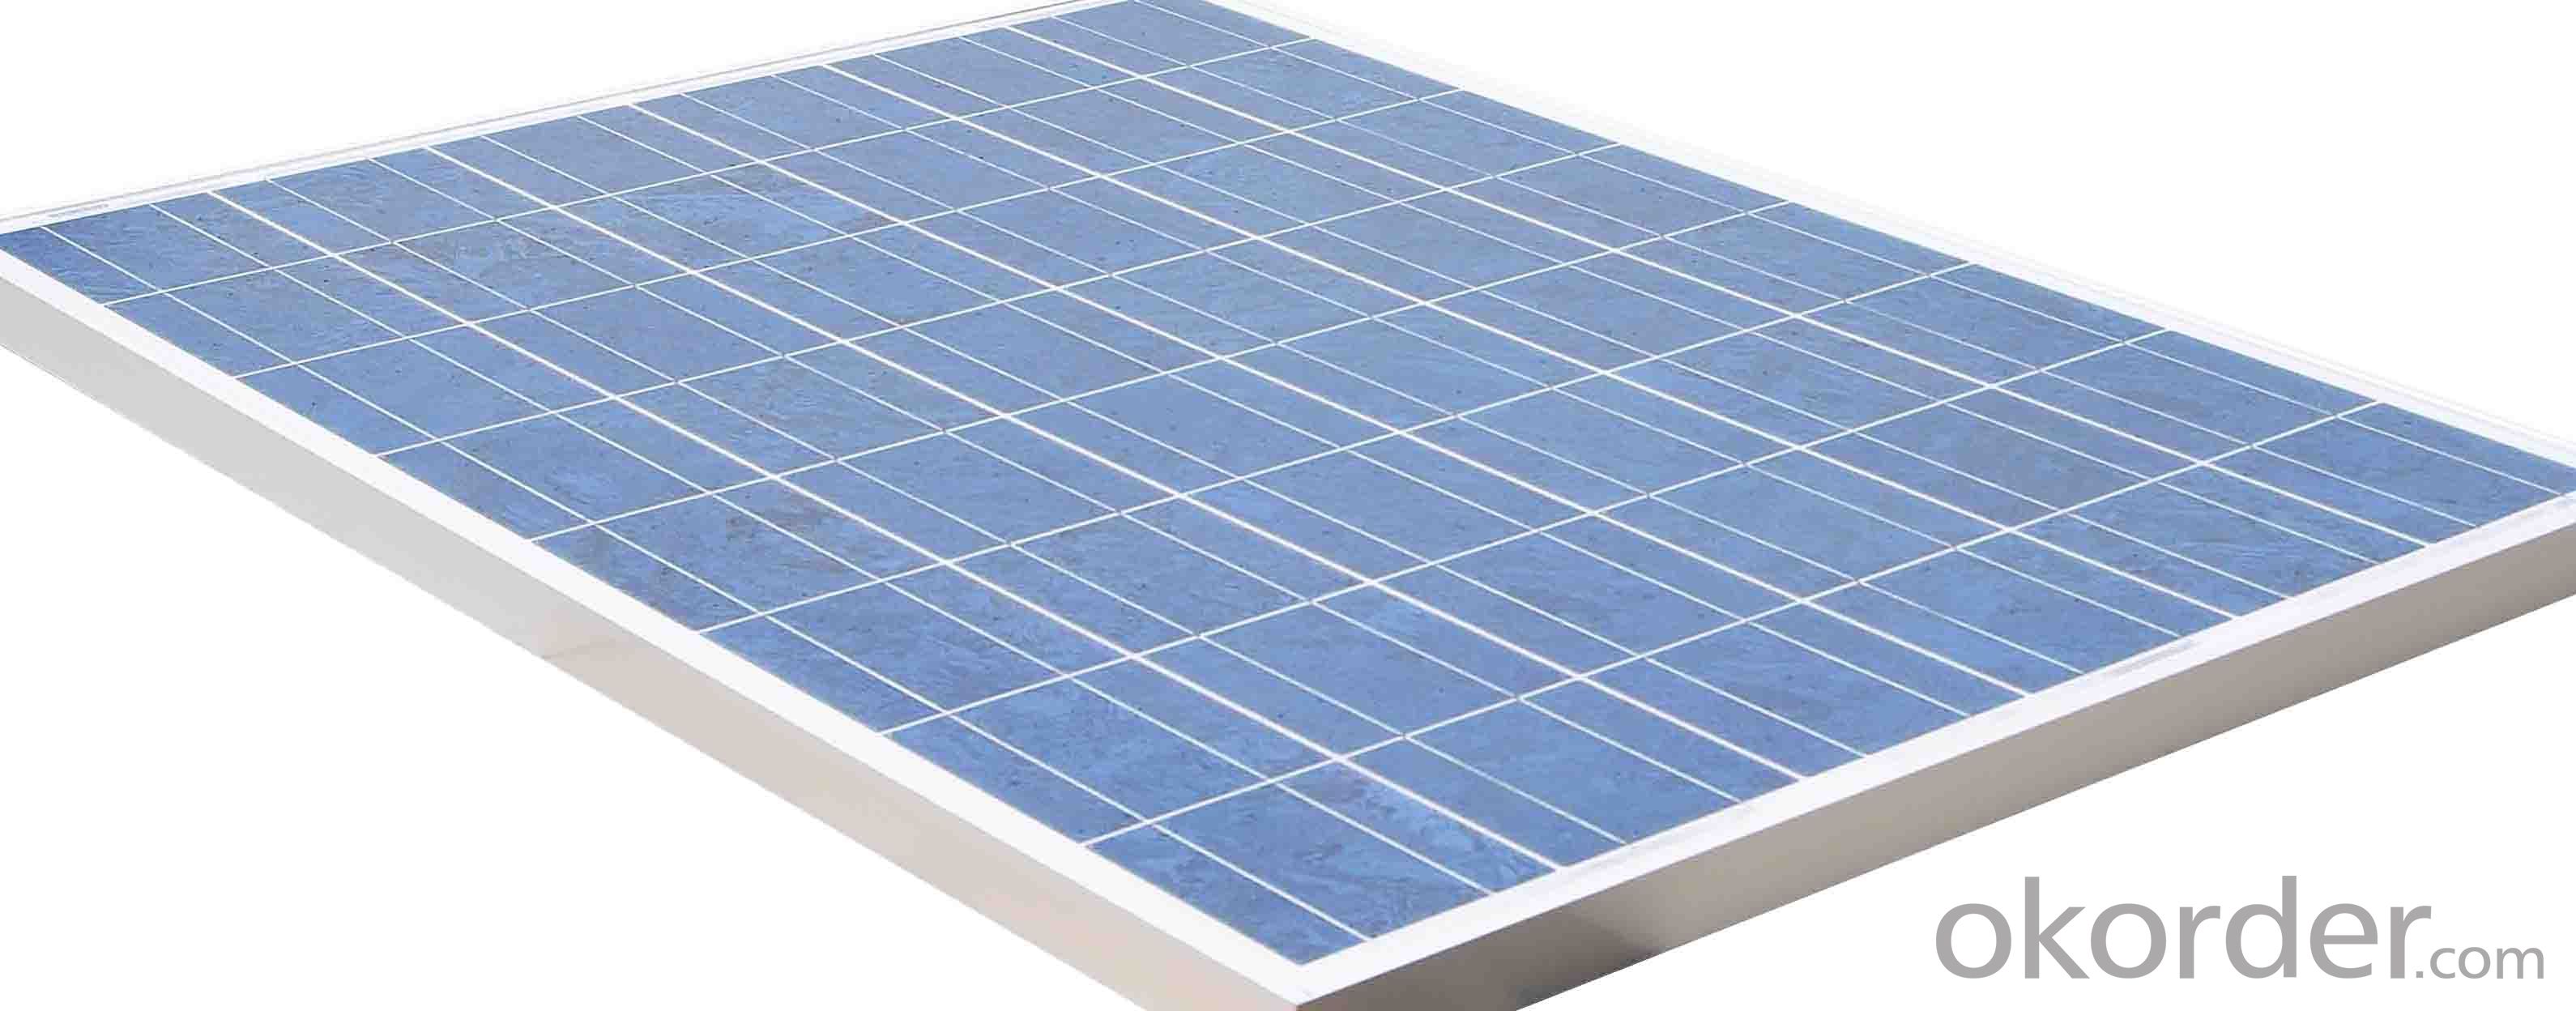 Poly Solar Module with IEC,TUV,CE,ISO,CEC 290W